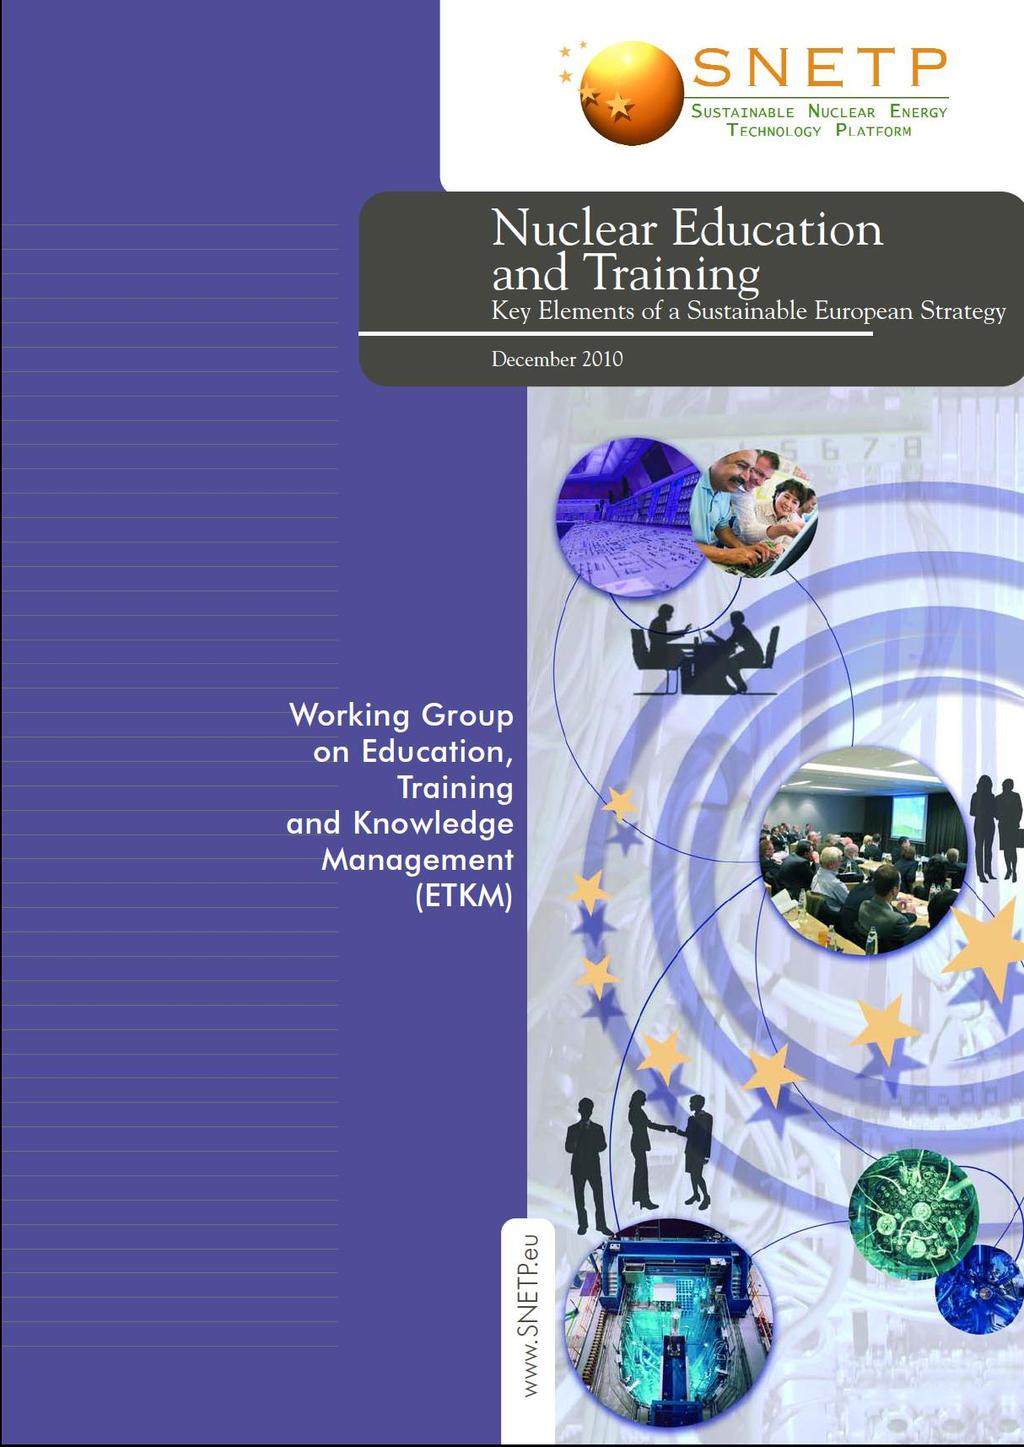 Report of the SNE-TP Working Group on Education